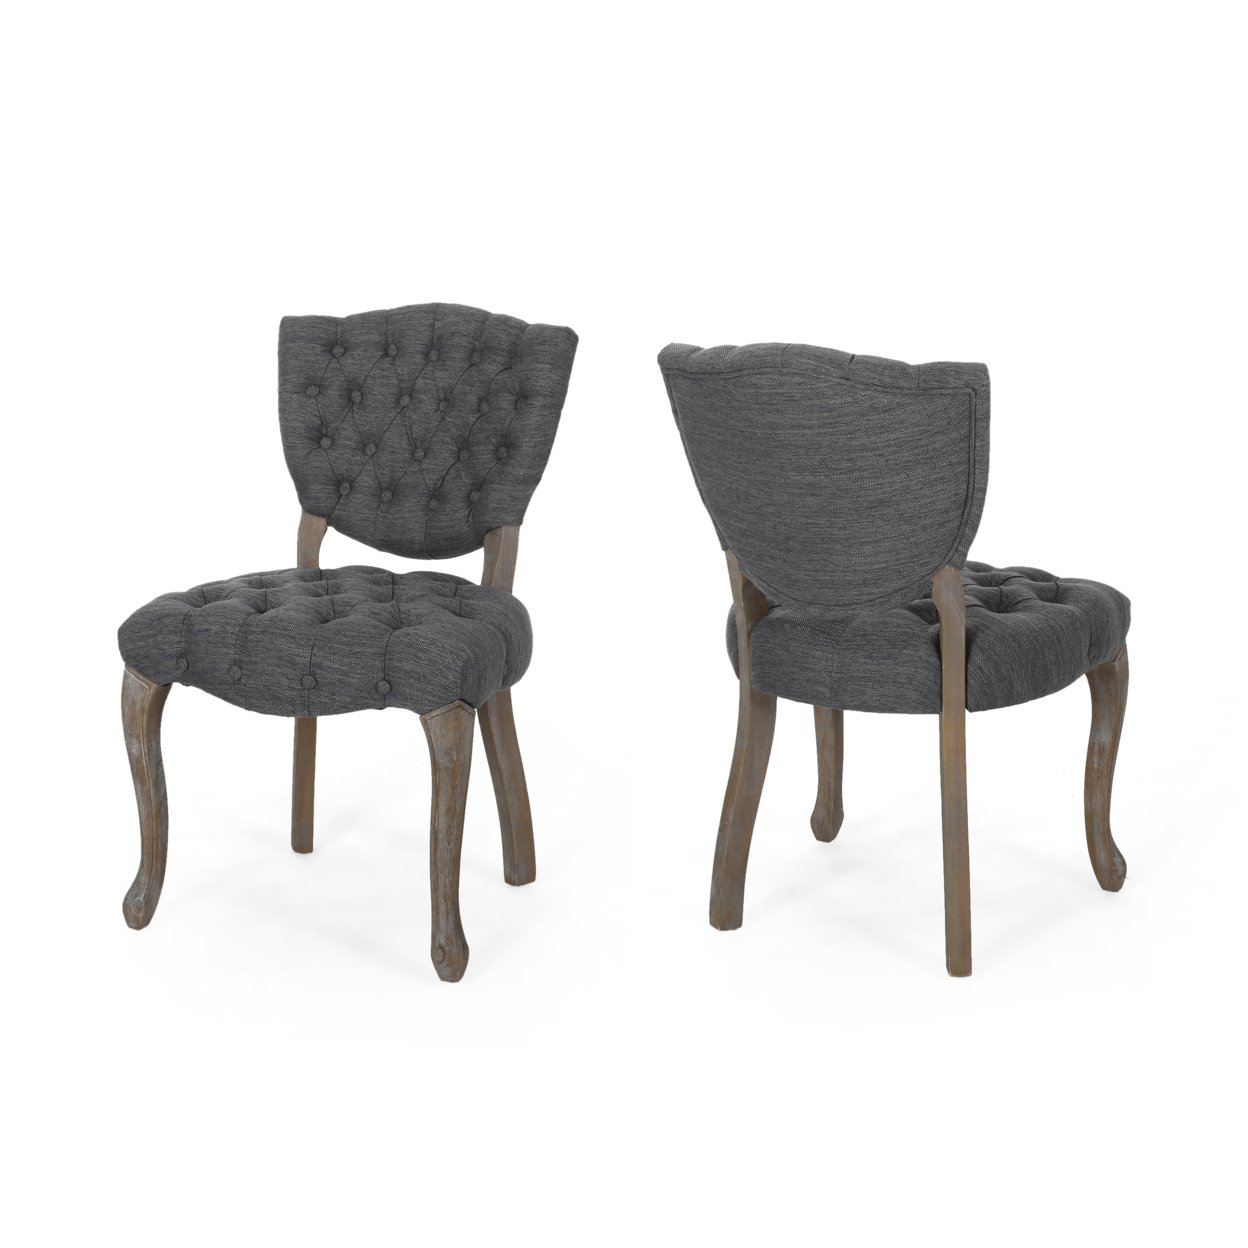 Case Tufted Dining Chair With Cabriole Legs (Set Of 2) - Beige + Brown